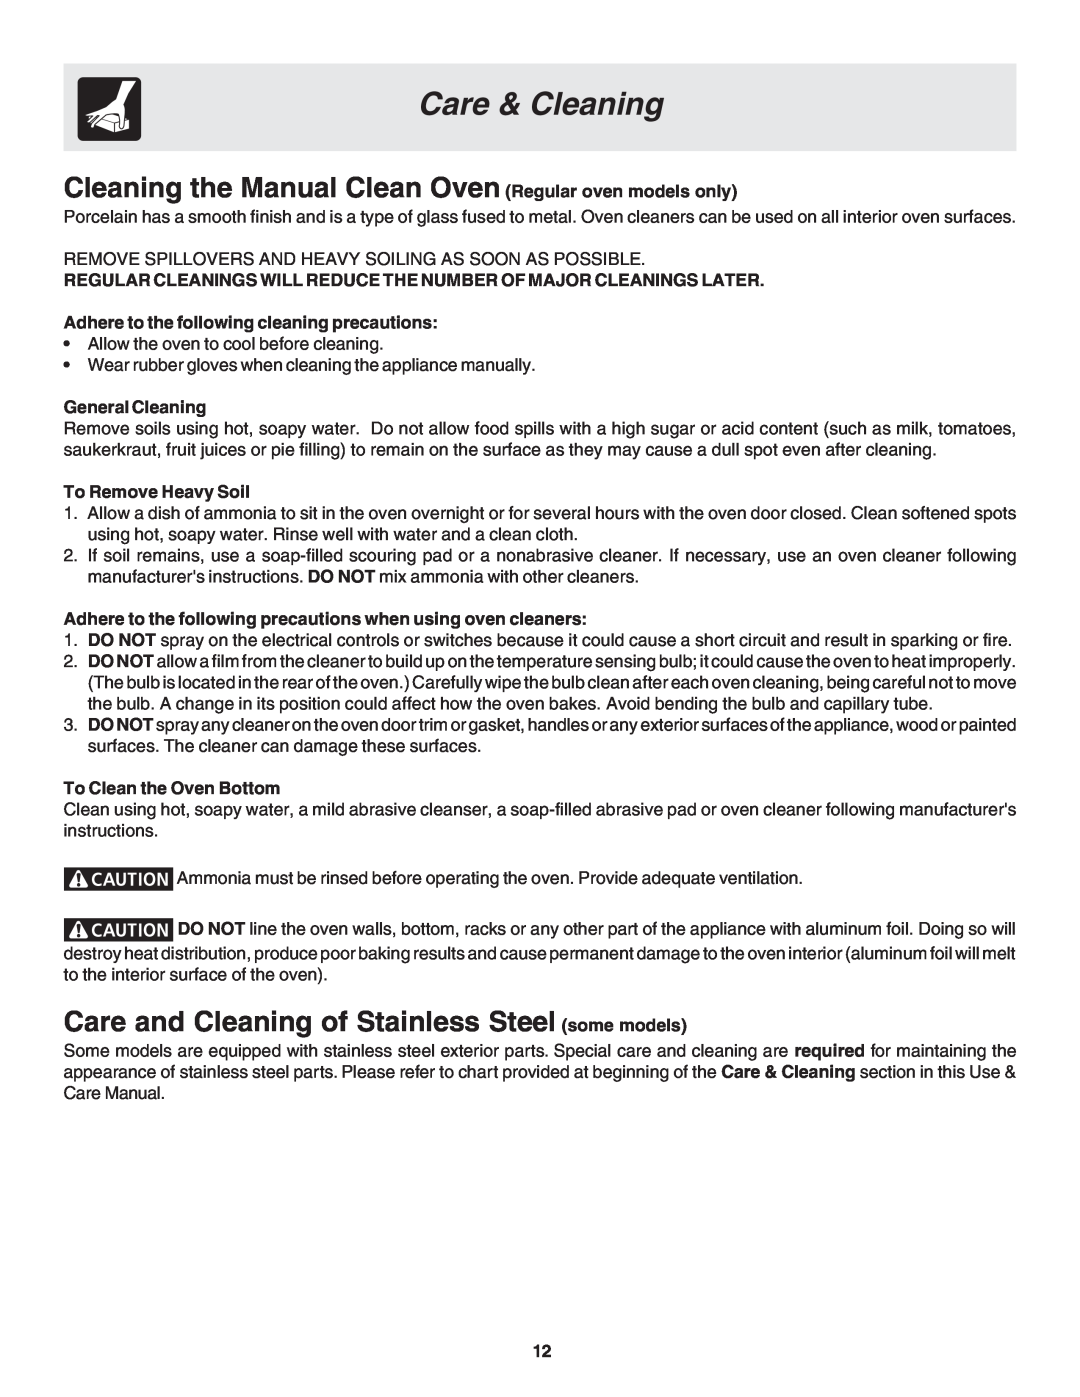 Frigidaire 318205115 Cleaning the Manual Clean Oven Regular oven models only, General Cleaning, To Remove Heavy Soil 